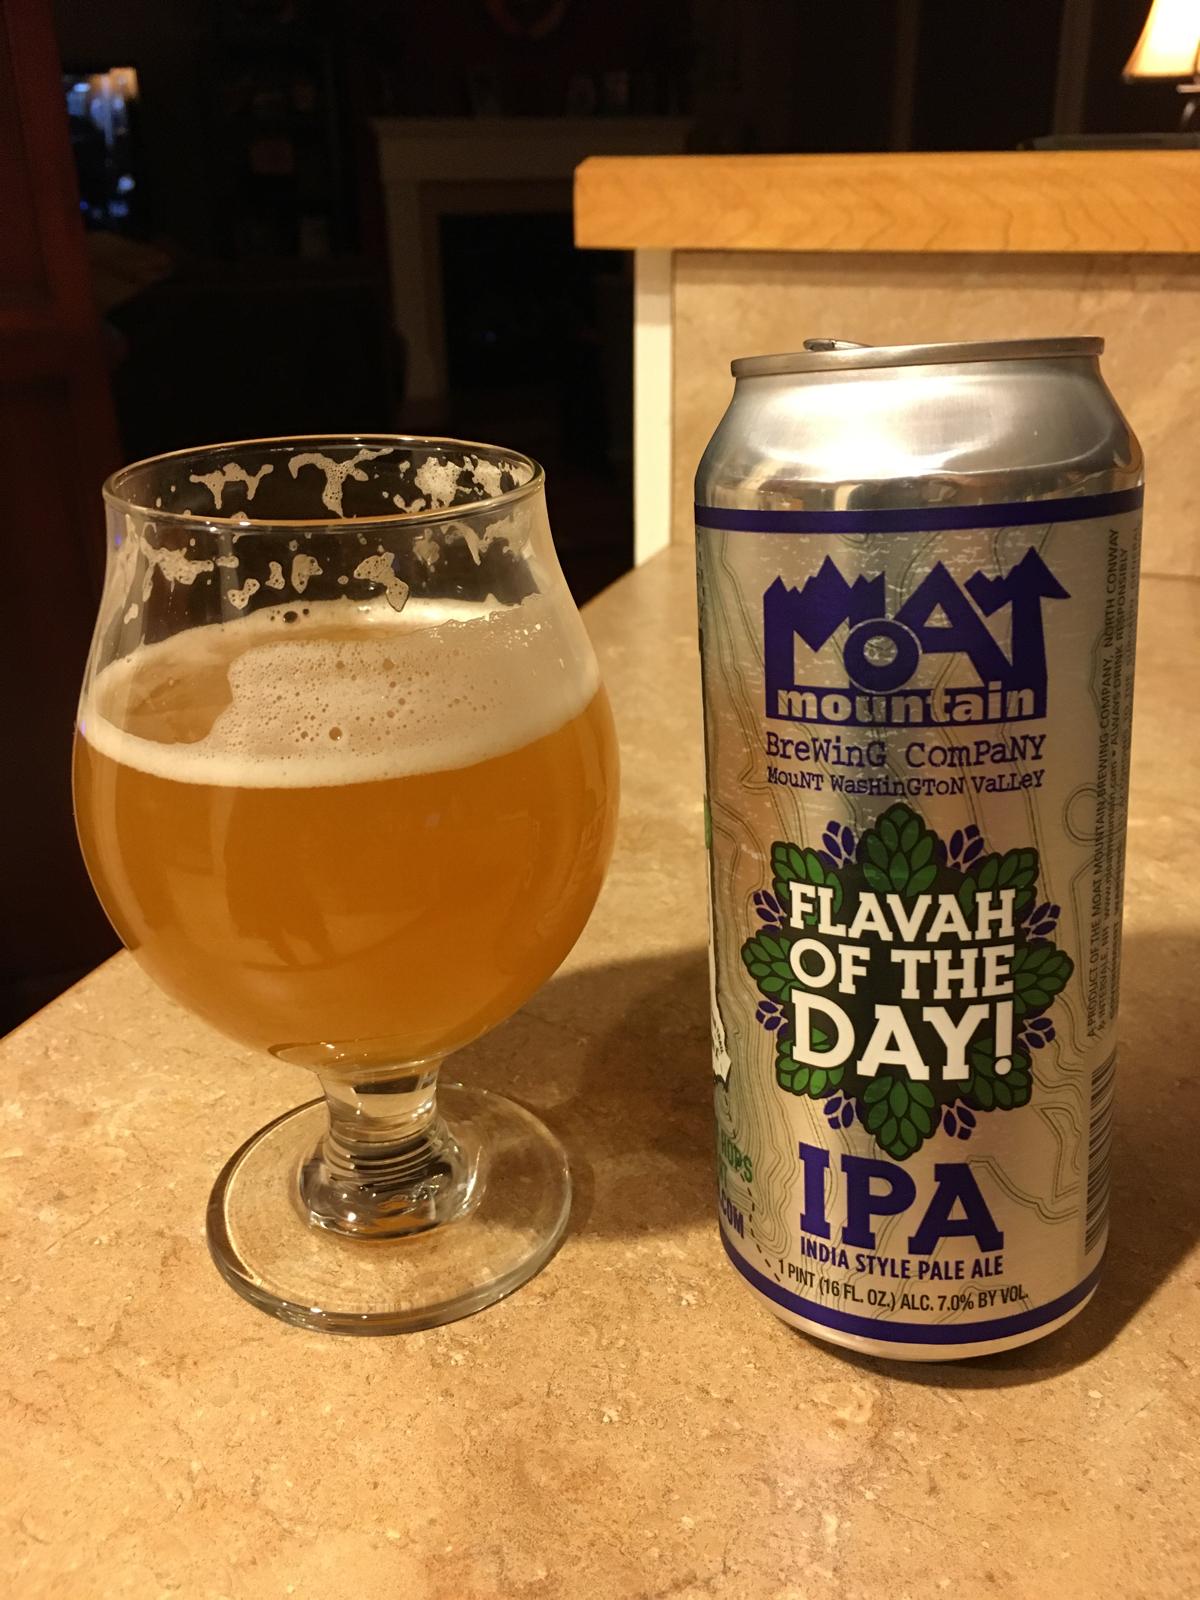 Flavah of the Day IPA